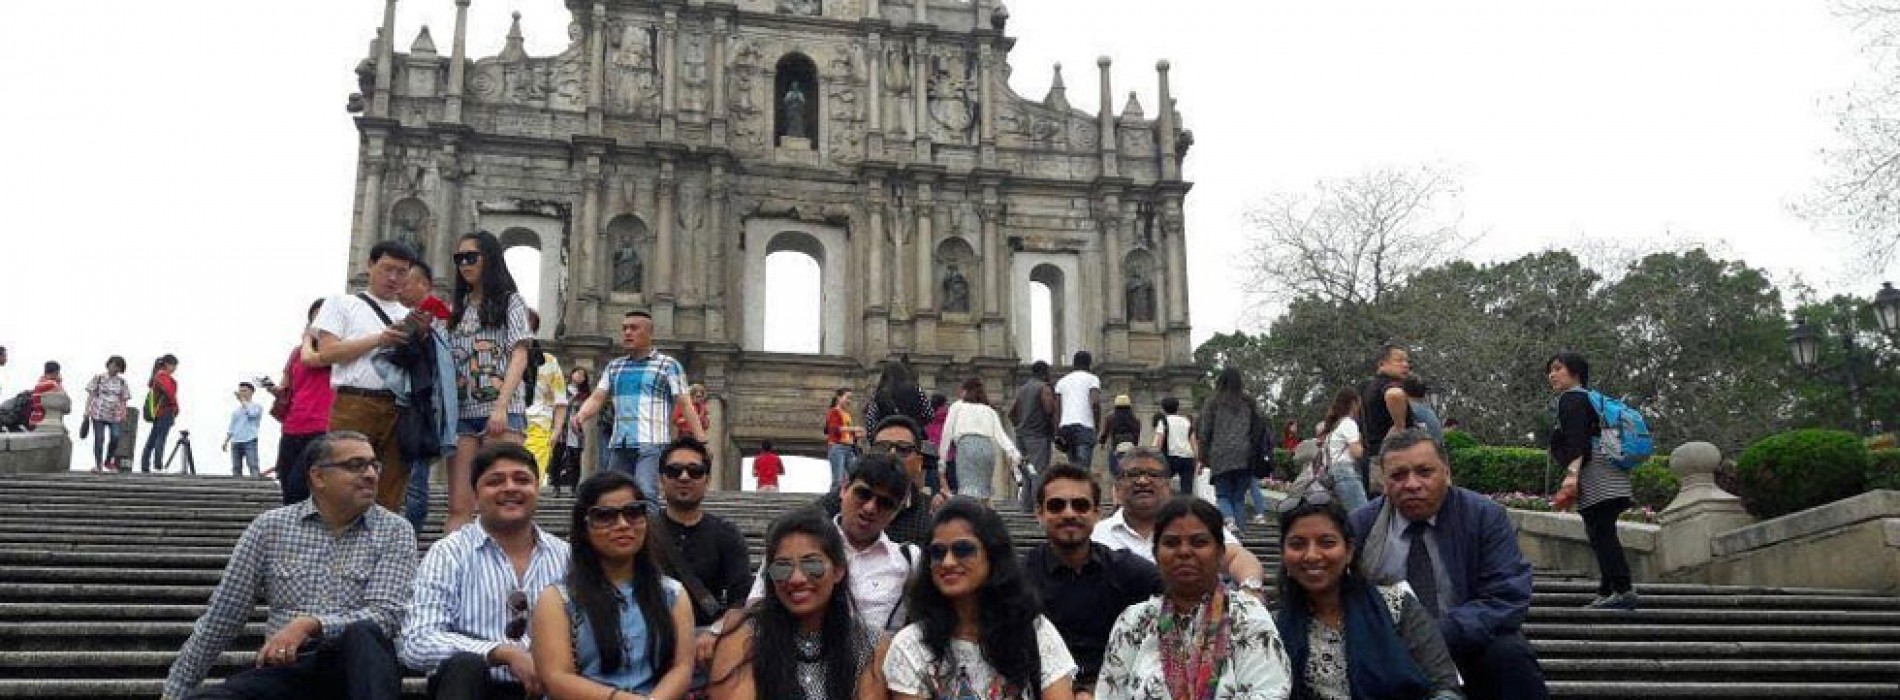 MGTO conducted FAM trip for top travel agents from India